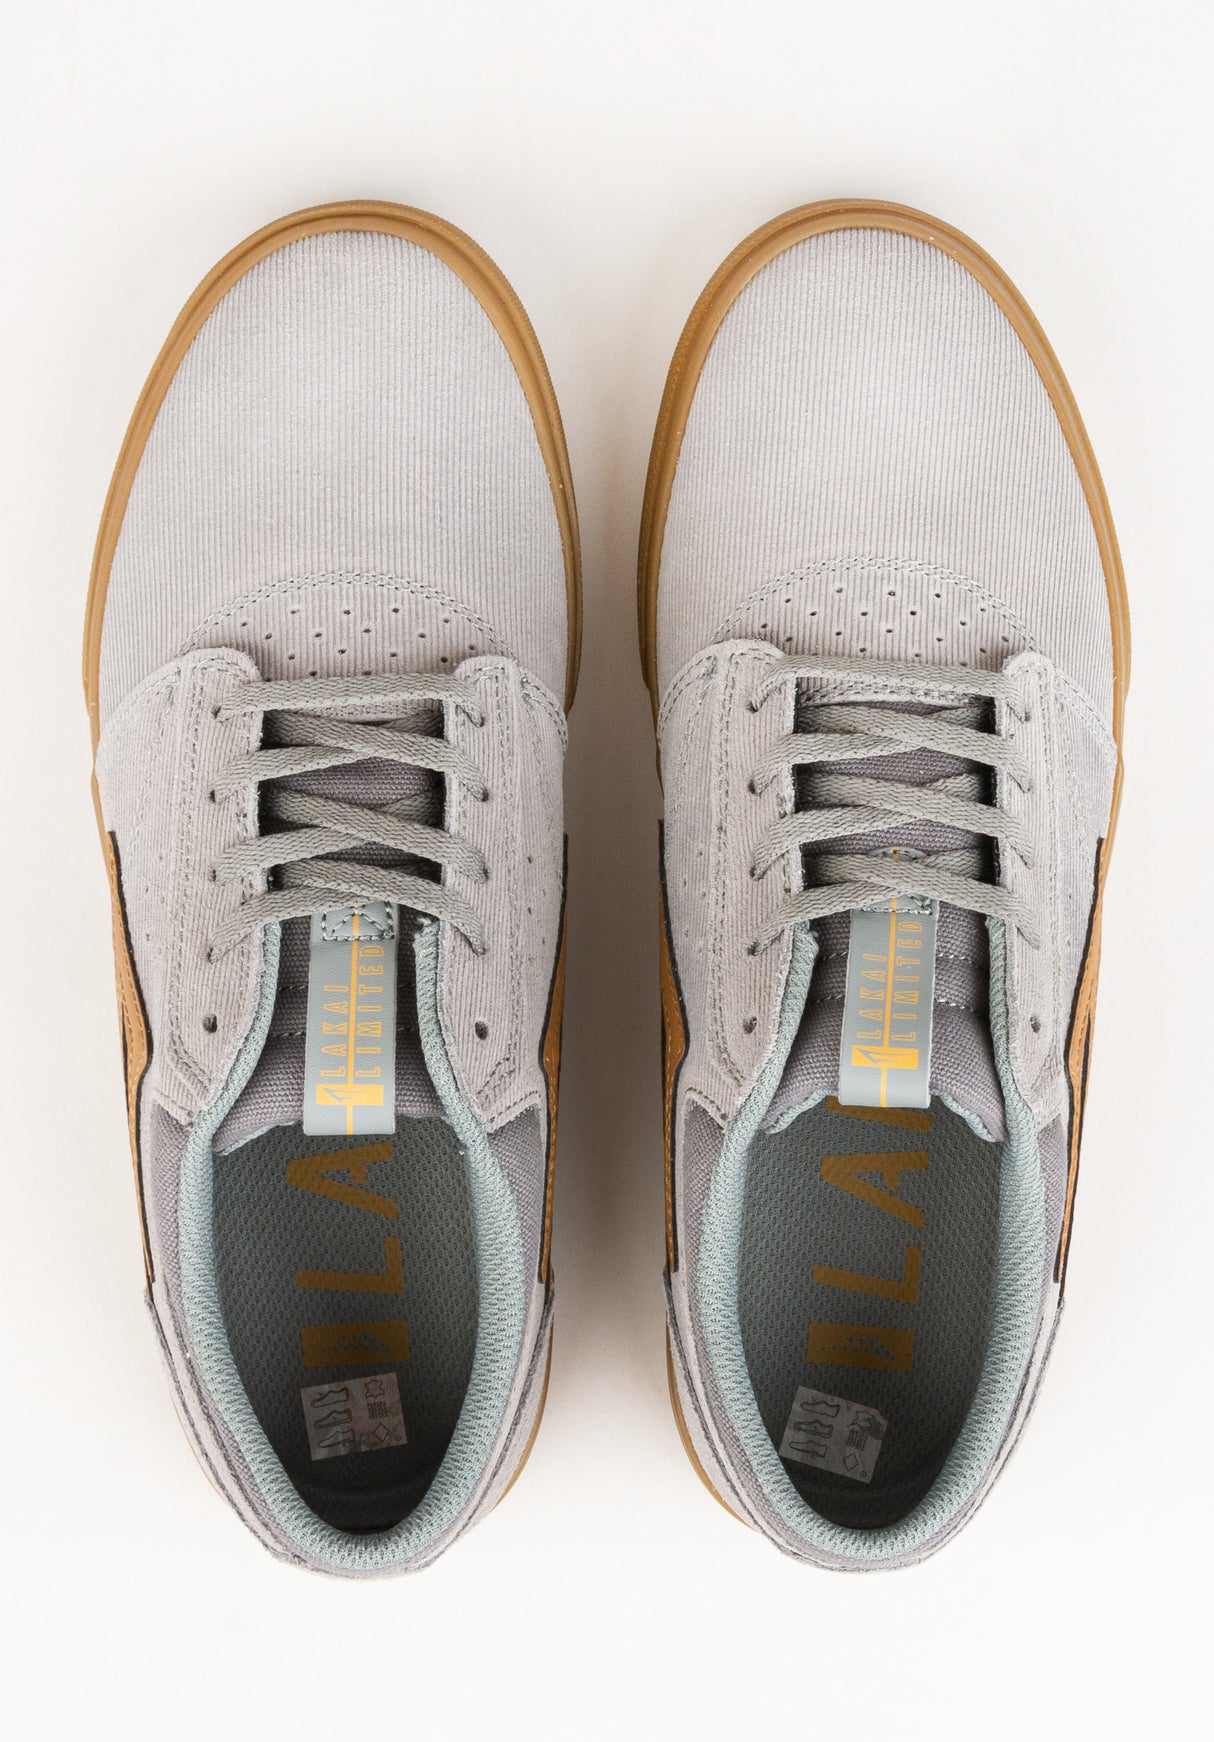 Griffin grey-gum-cord-suede Close-Up2